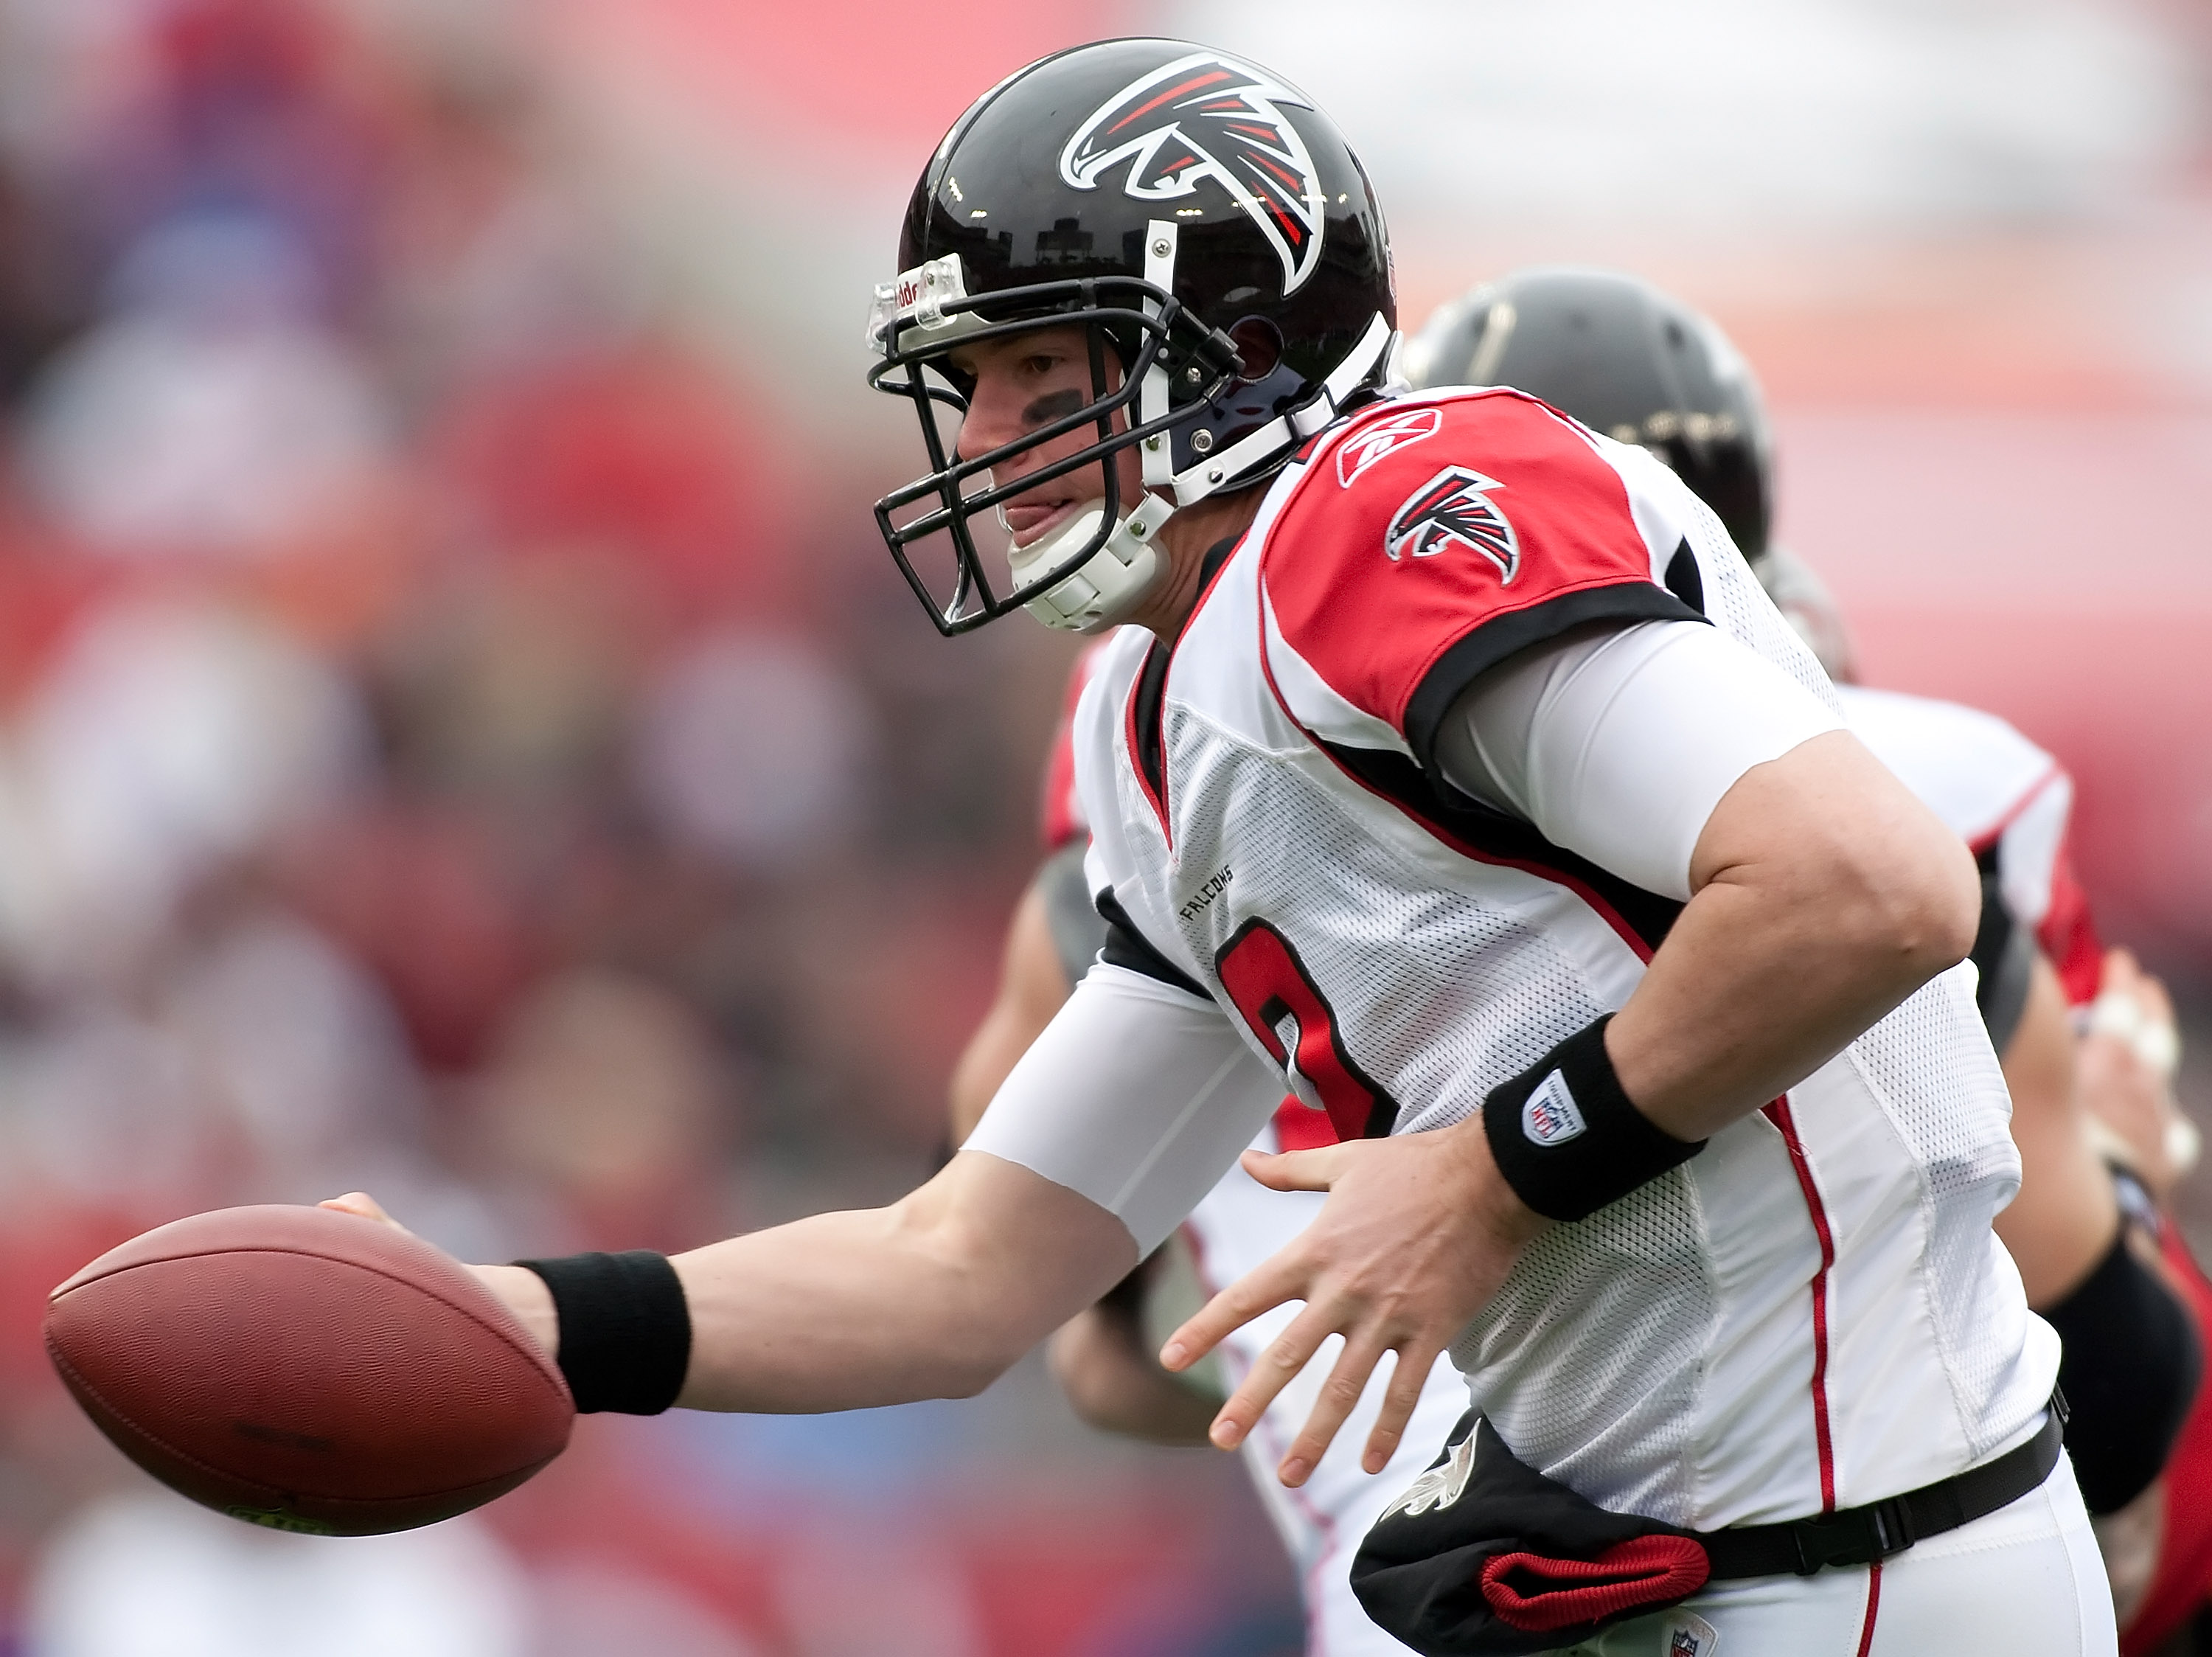 TAMPA, FL - JANUARY 03:  Quarterback Matt Ryan #2 of the Atlanta Falcons hands the ball off against the Tampa Bay Buccaneers during the game at Raymond James Stadium on January 3, 2010 in Tampa, Florida.  (Photo by J. Meric/Getty Images)